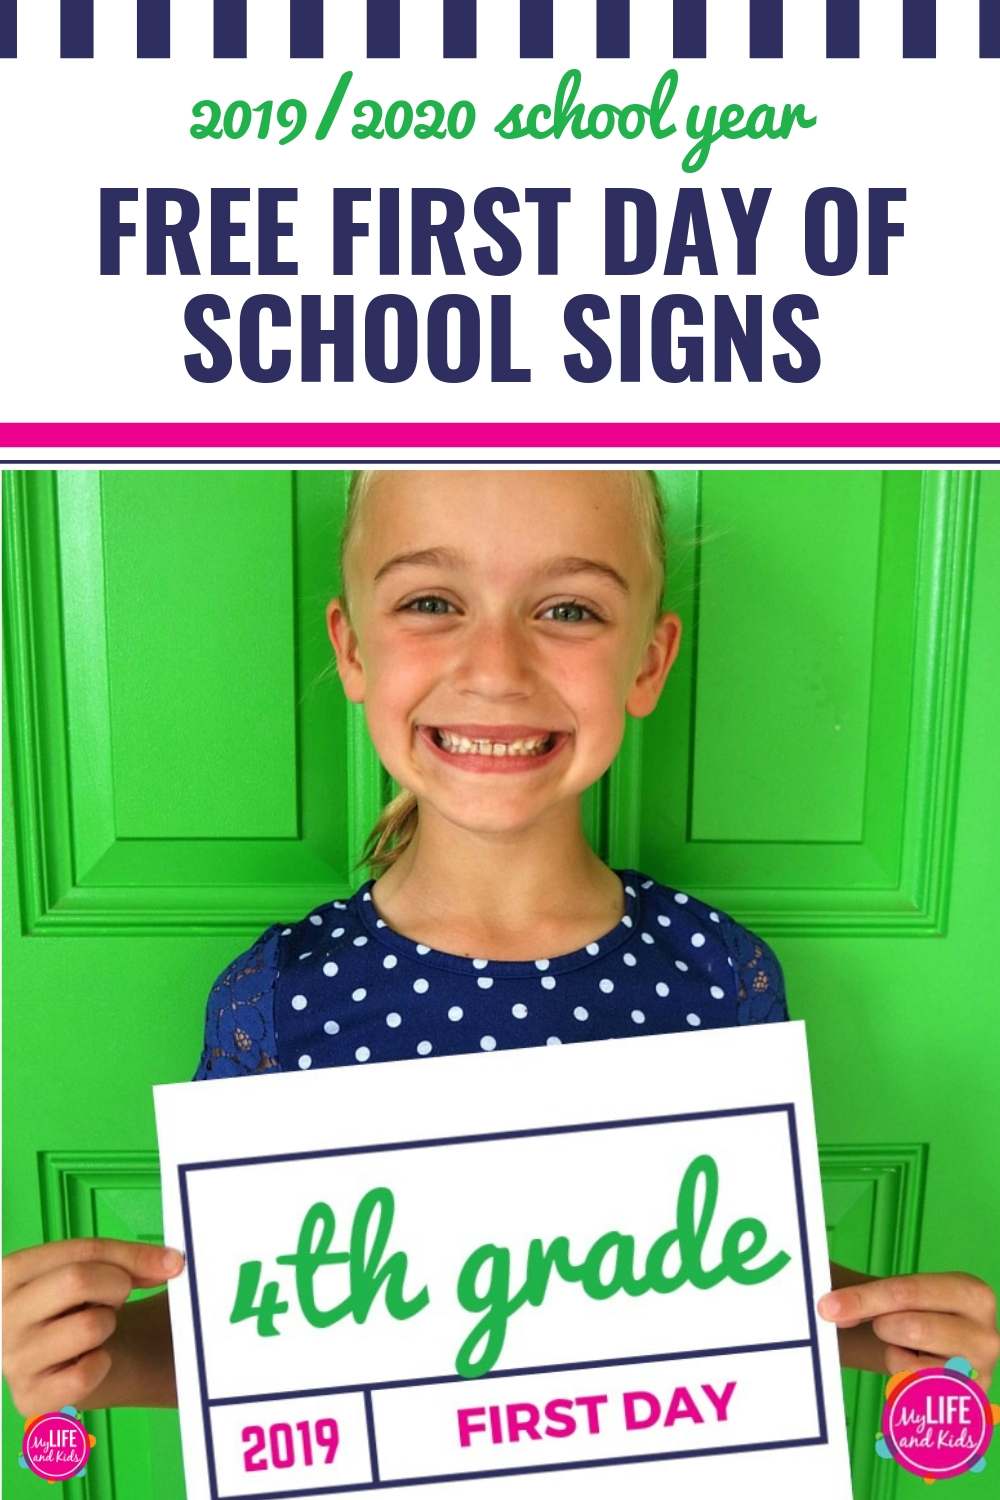 free-first-day-of-school-signs-my-life-and-kids